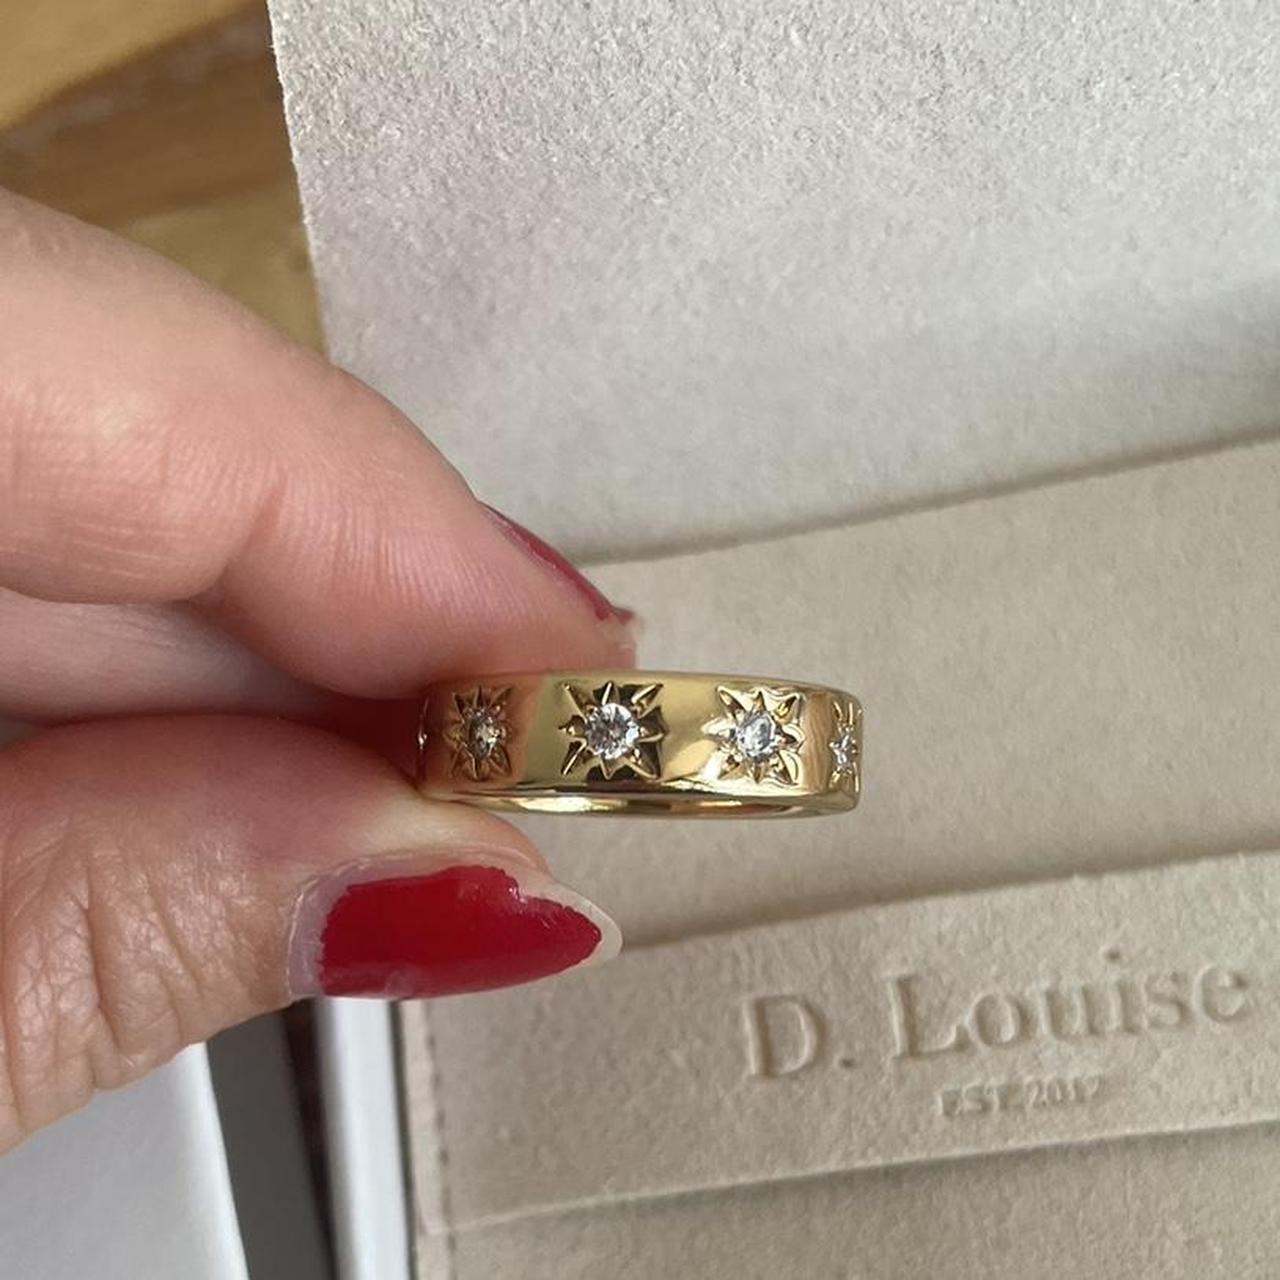 D Louise gold ring ✨✨ US size 8 Never worn, just - Depop